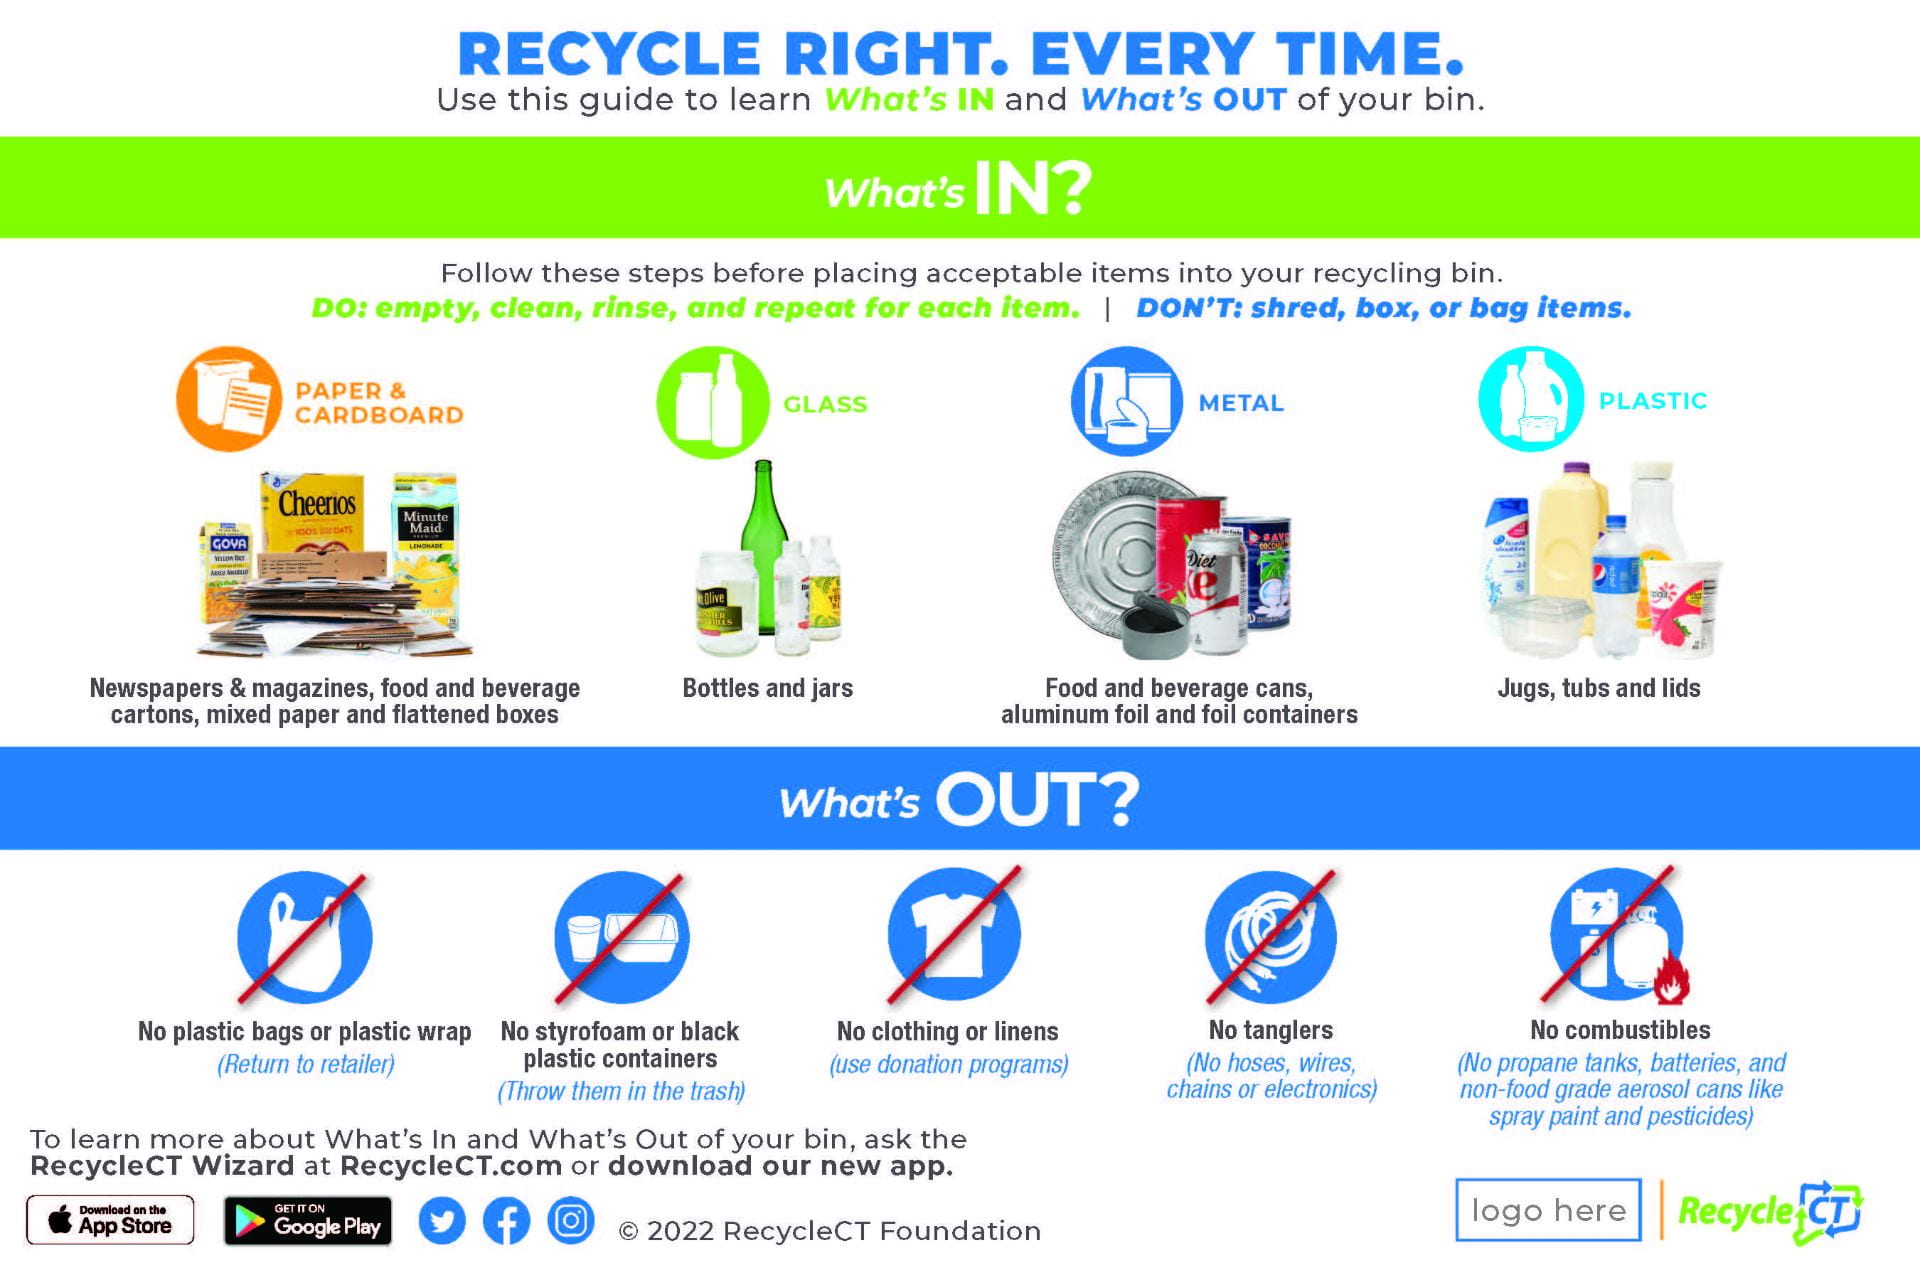 Recycle CT Recycle Right. Every Time guide to learn What's IN and What's OUT of your bin.